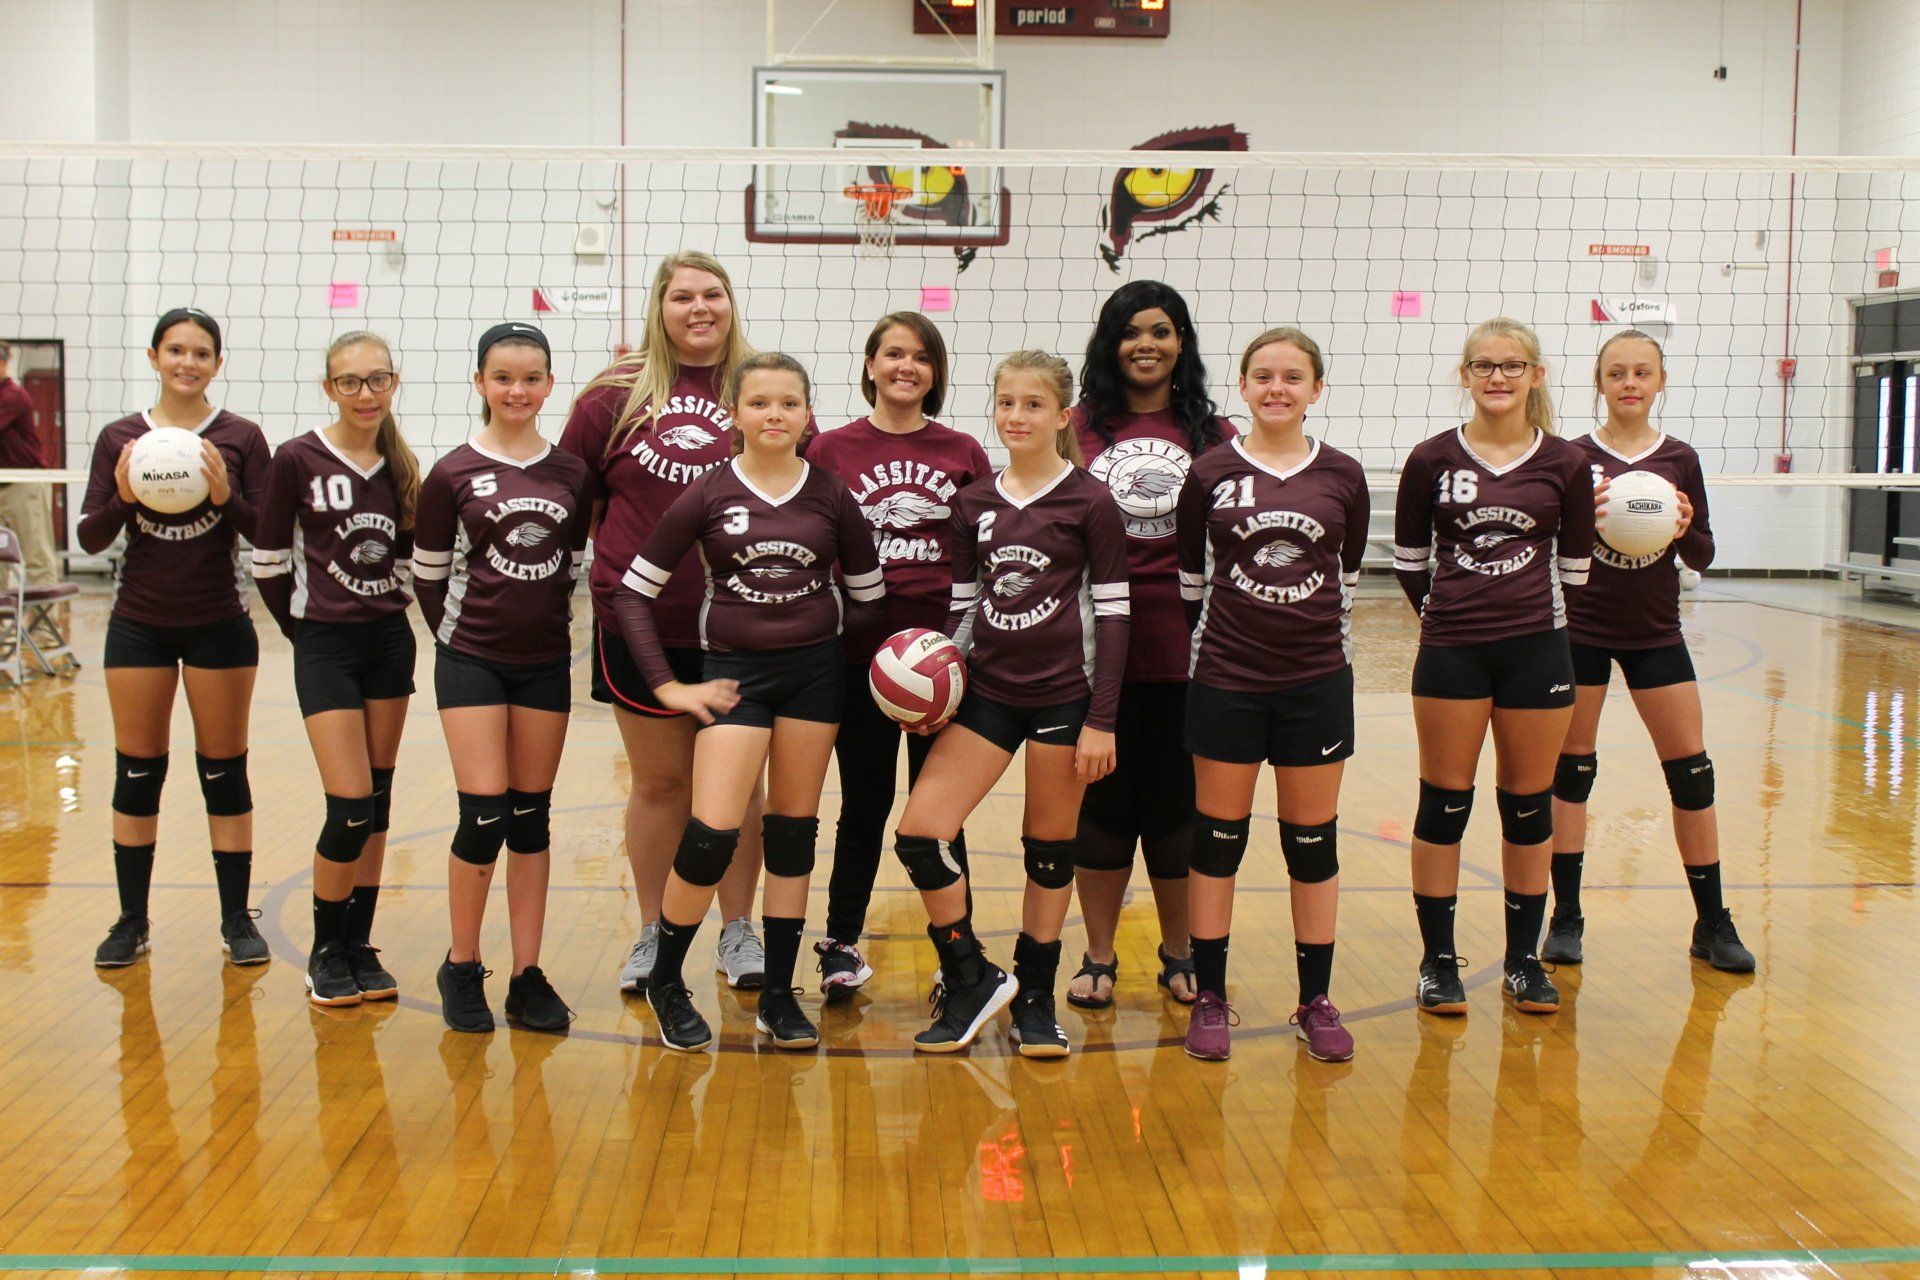 a group of girls are posing for a picture in front of a volleyball net .